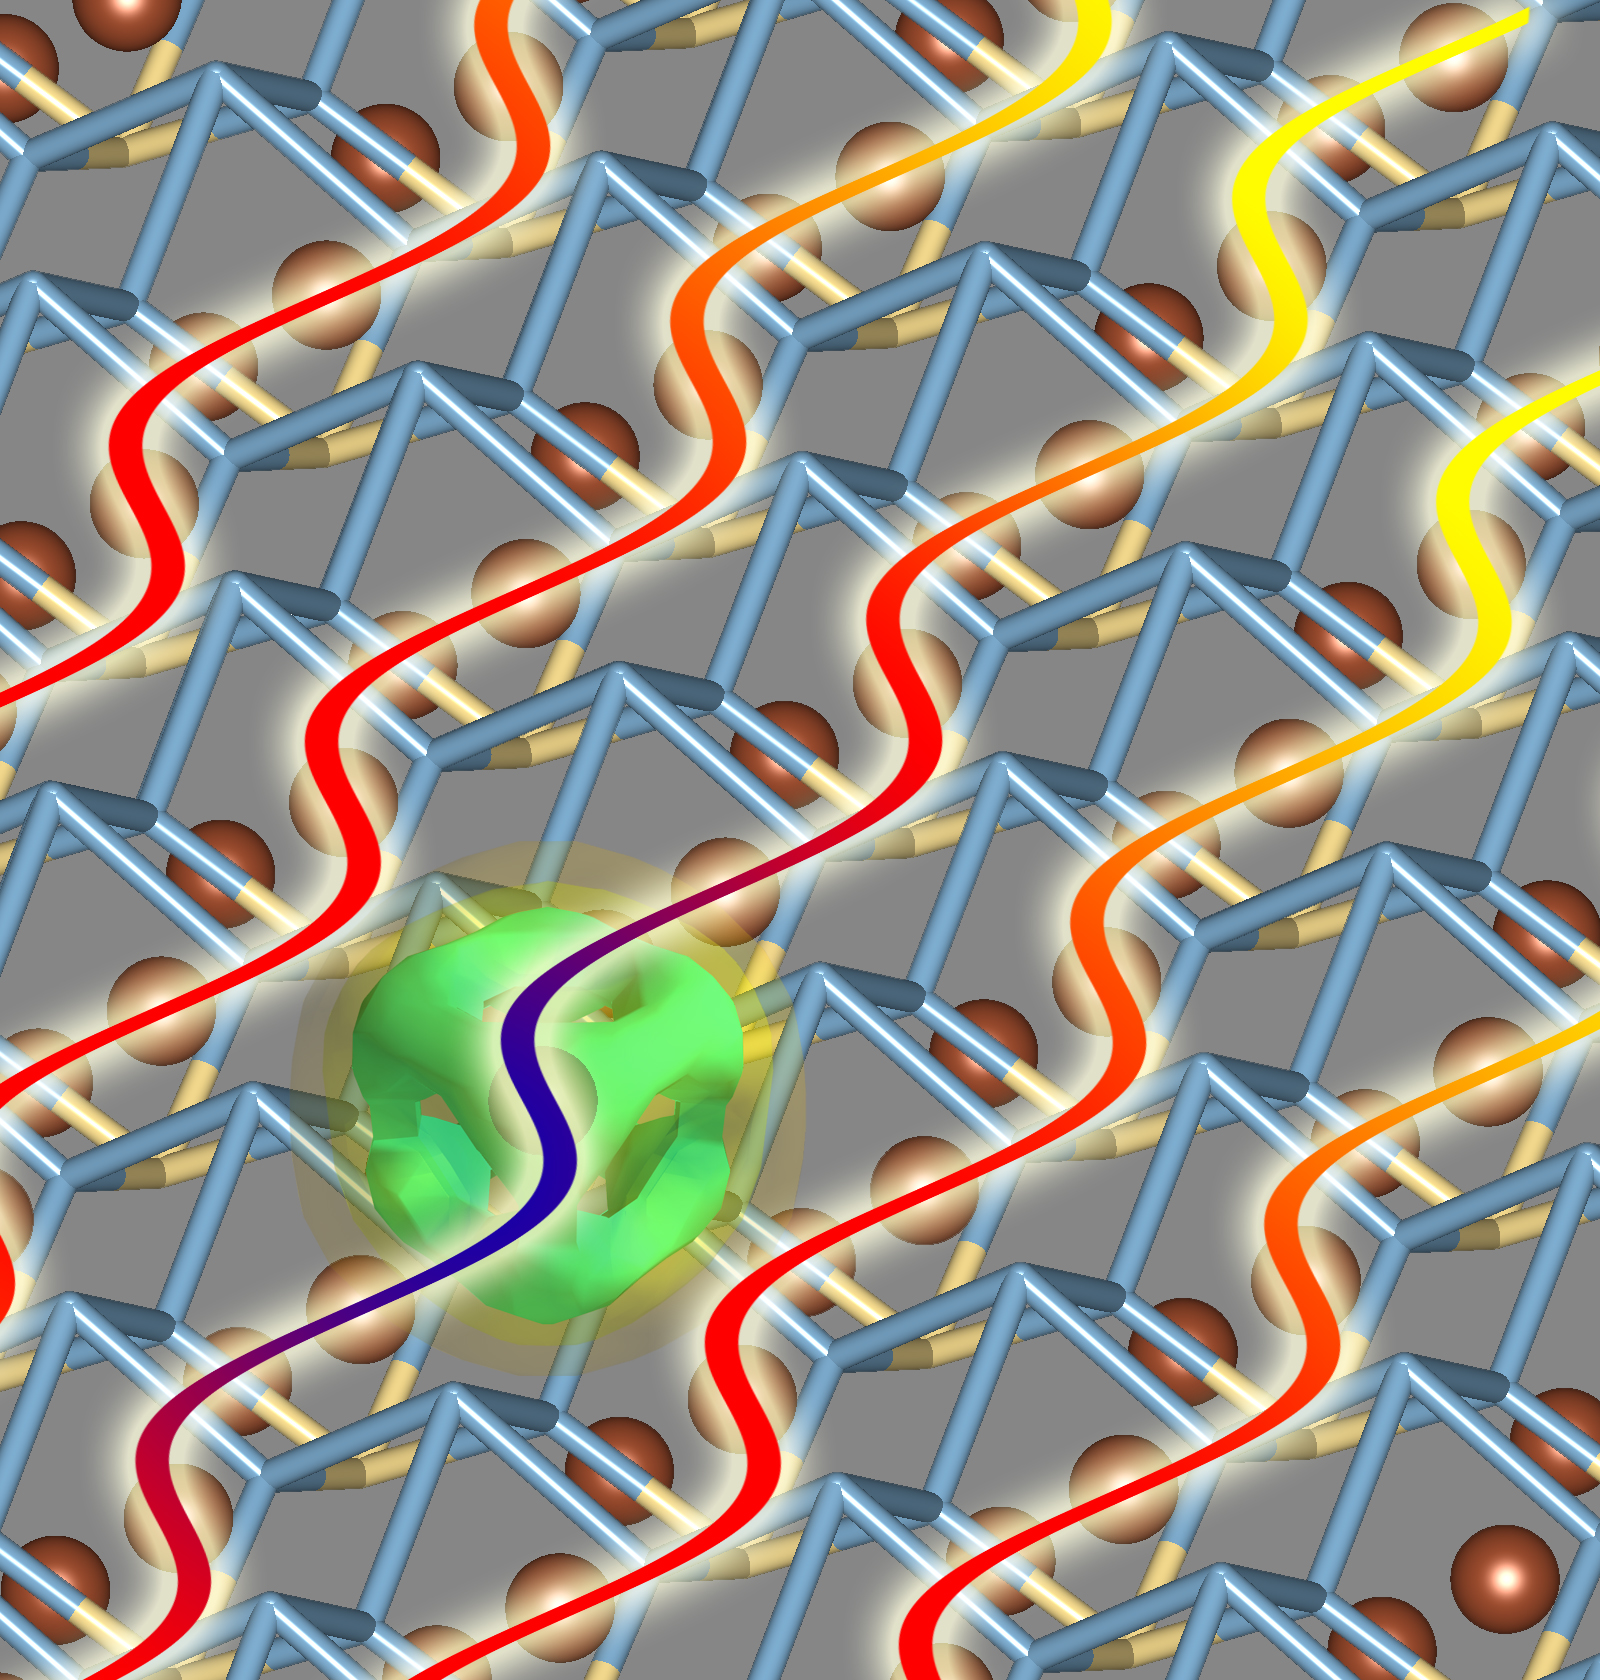 Electrons (green) influence the lattice vibration (pink waves) of the crystal and vice versa. Golden balls represent the Cerium atoms, which mainly cause the magnetism of the crystal under examination.